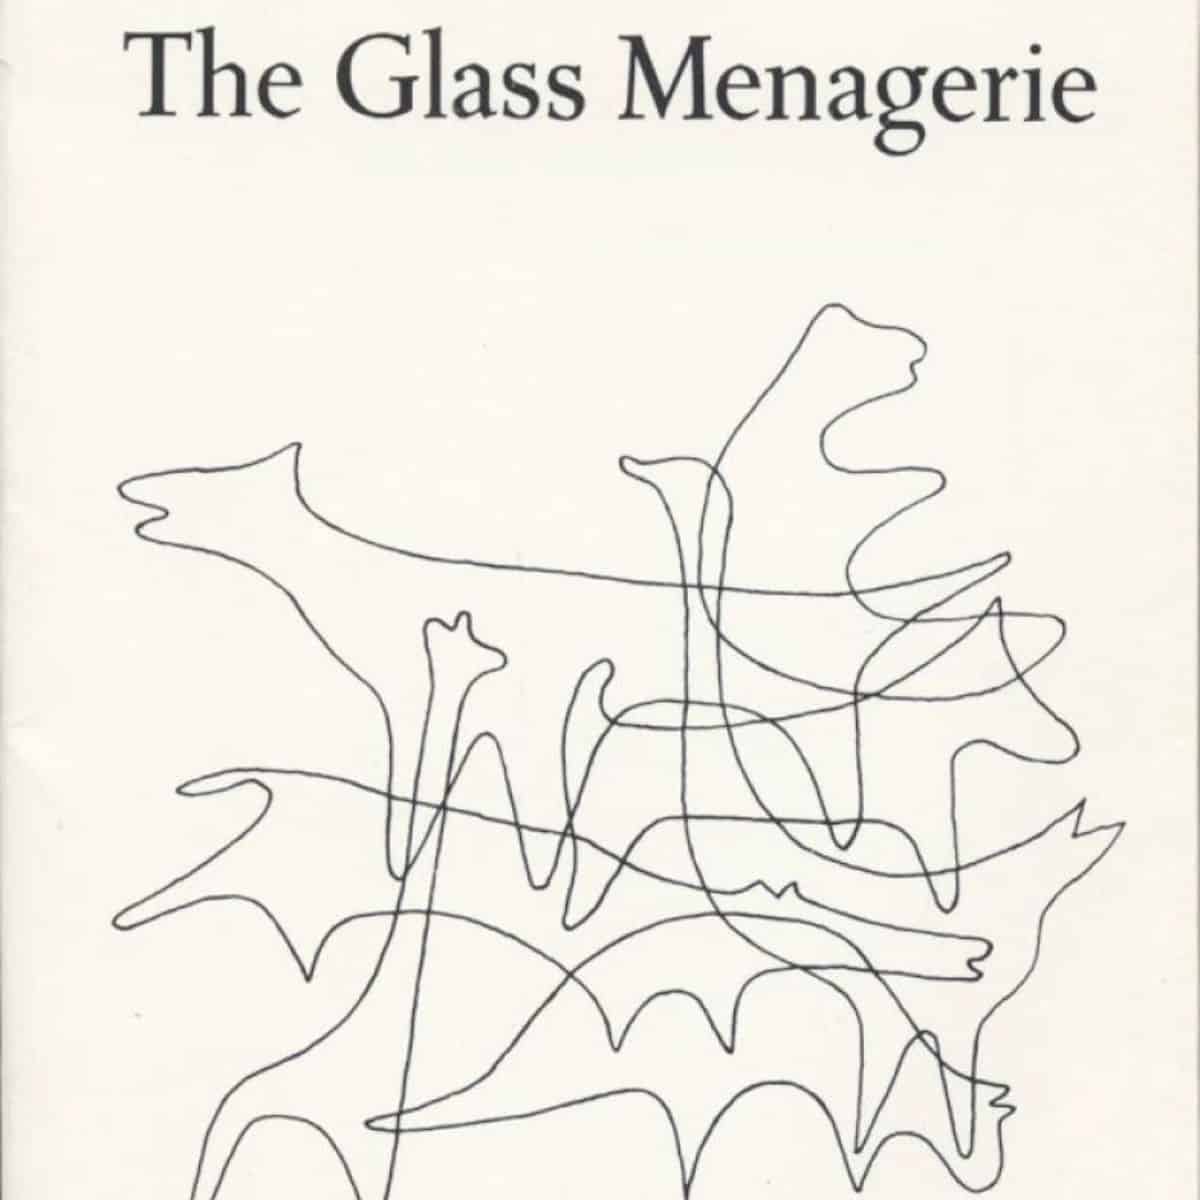 Discussion of The Glass Menagerie As a Memory Play